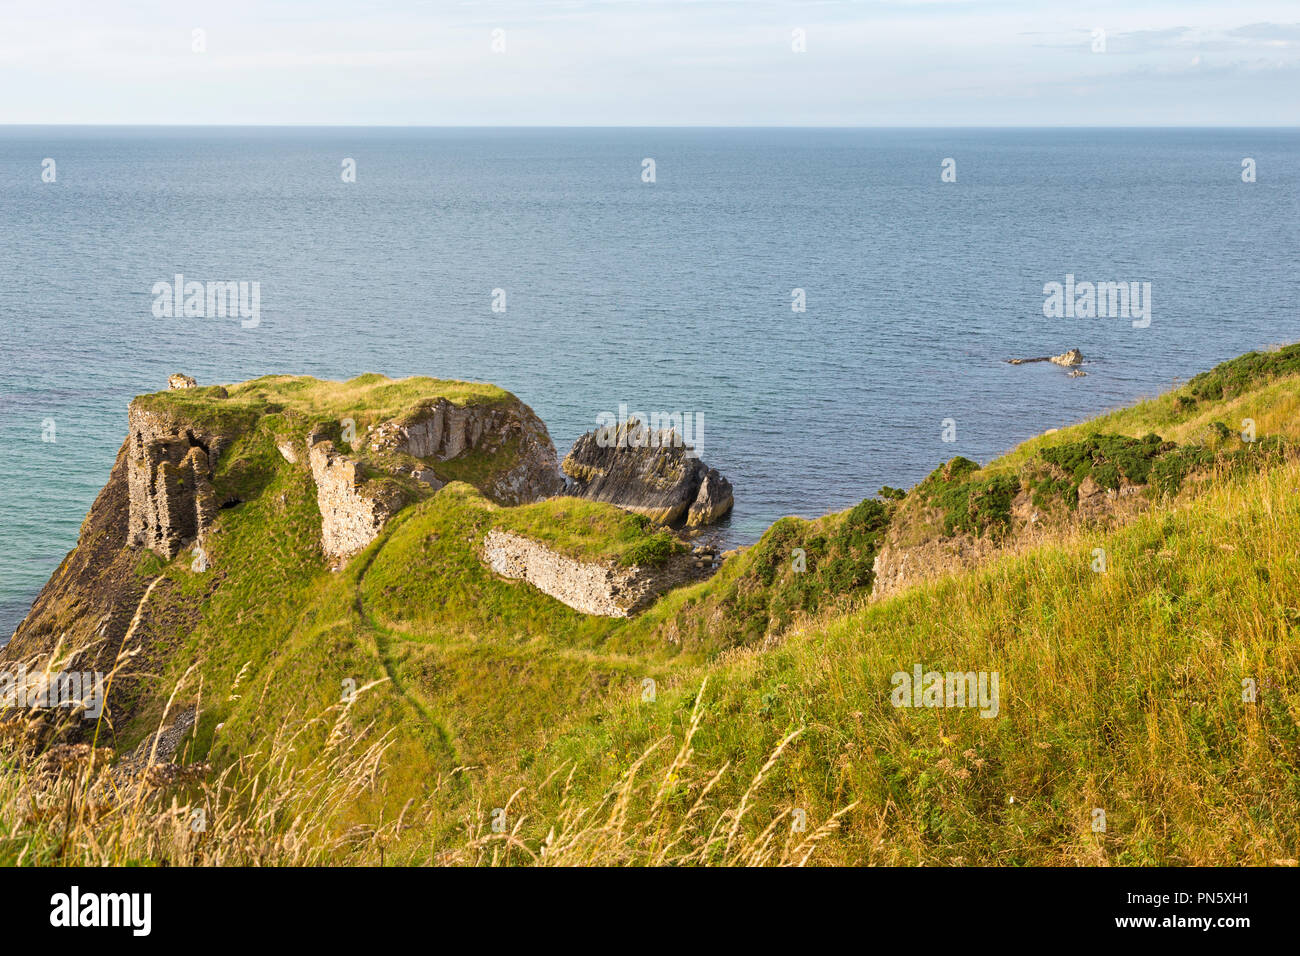 View of Findlater Castle over looking the Moray Firth in Scotland Stock Photo